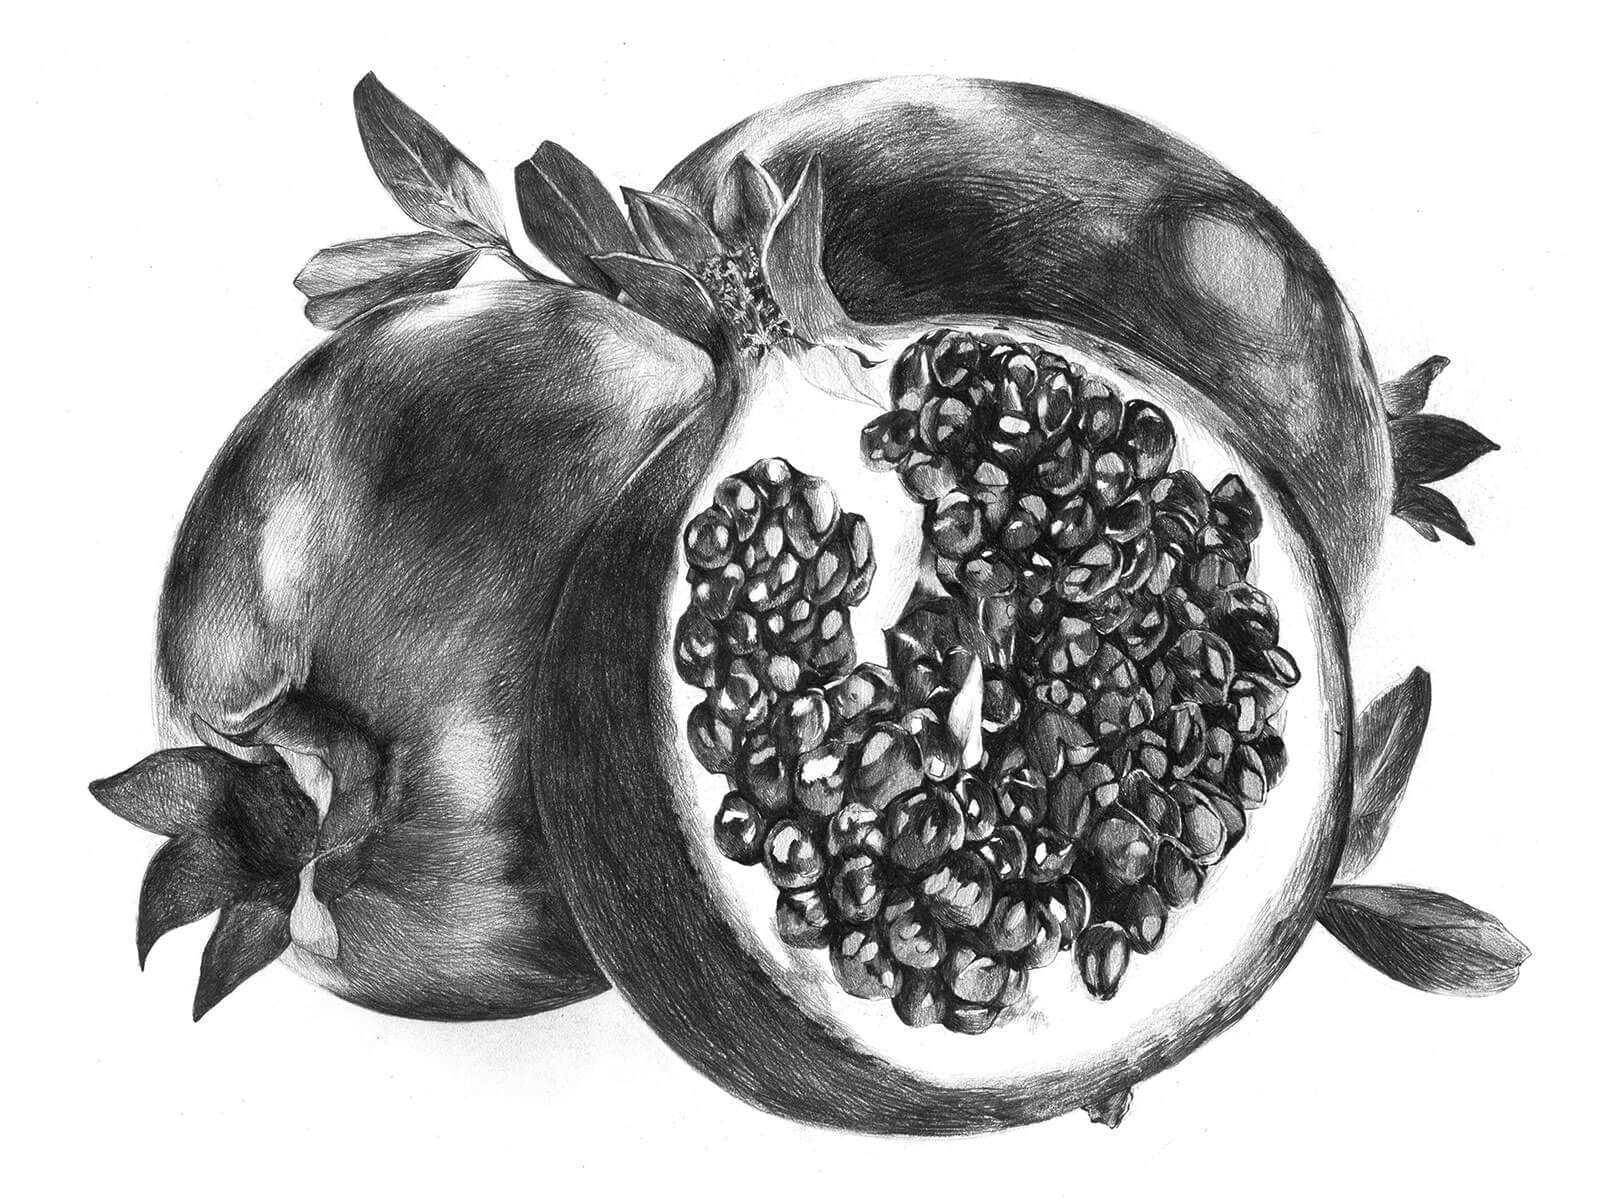 Black-and-white sketch of pomegranates, one of which is sliced in half.